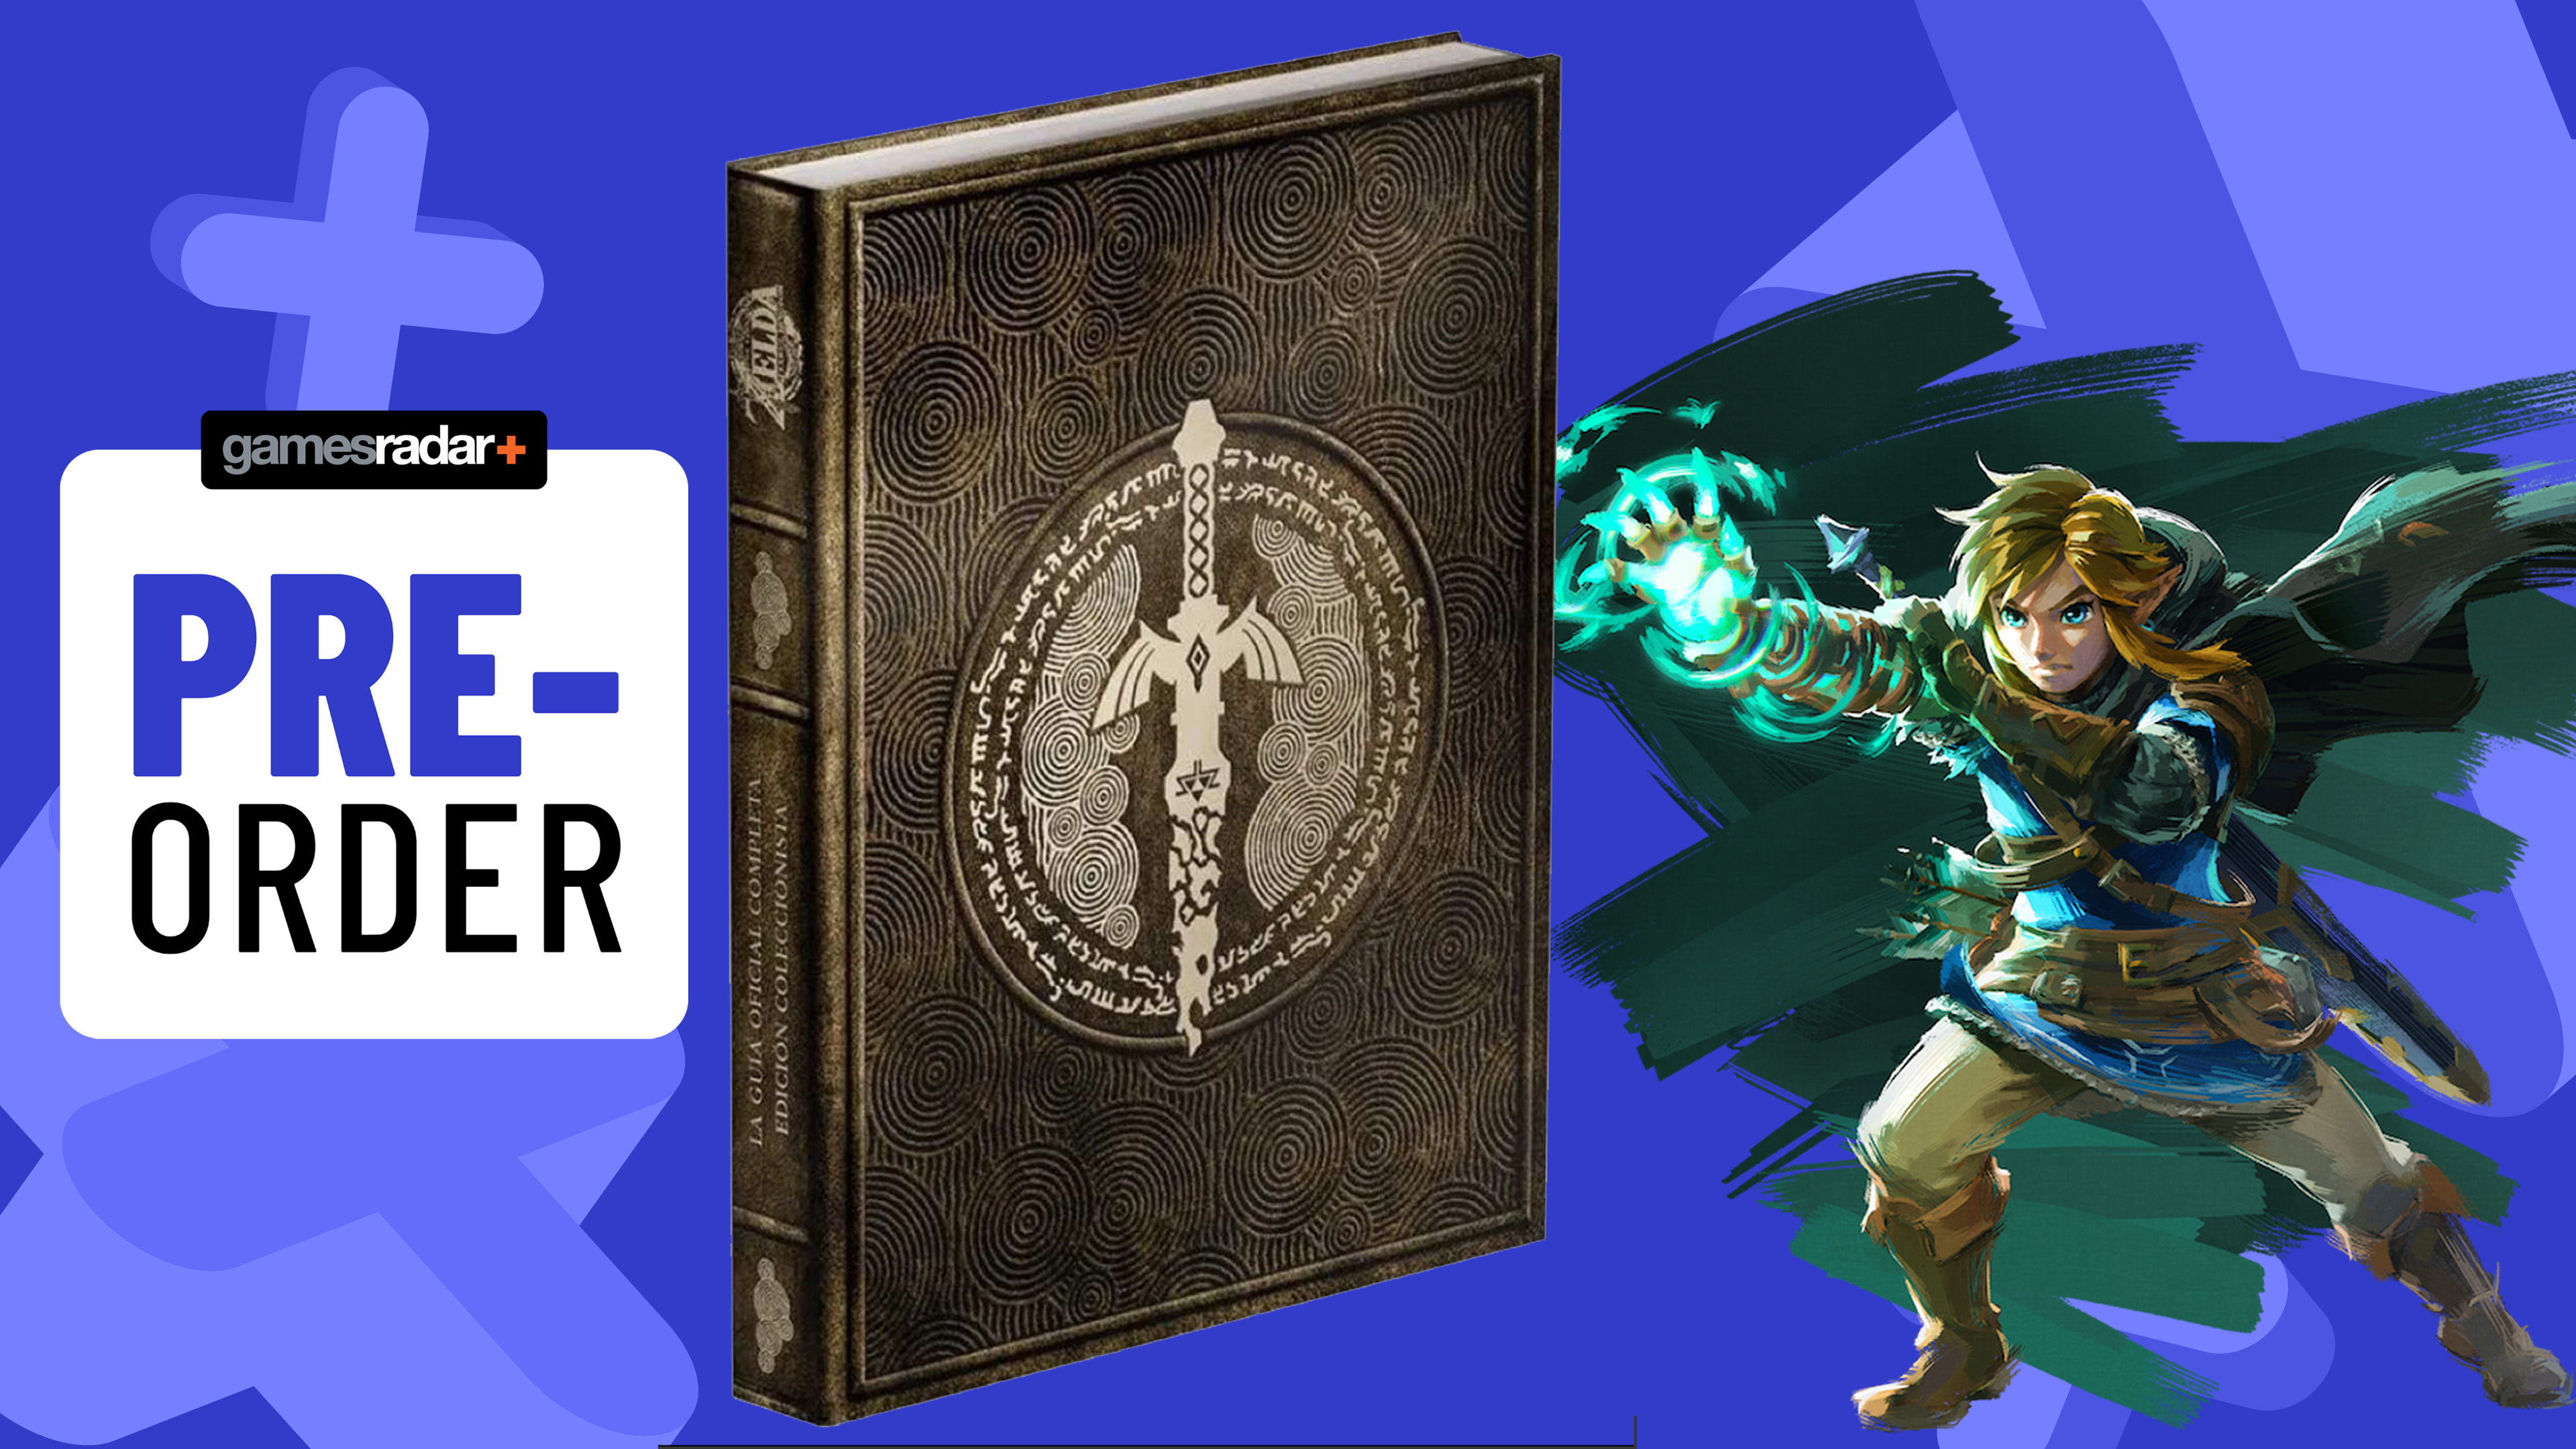 The Legend of Zelda: Breath of the Wild - Guide Book: The Guide That Will  Take Your Gaming To The Next Level! Get The Info You Need In Order To  Become The